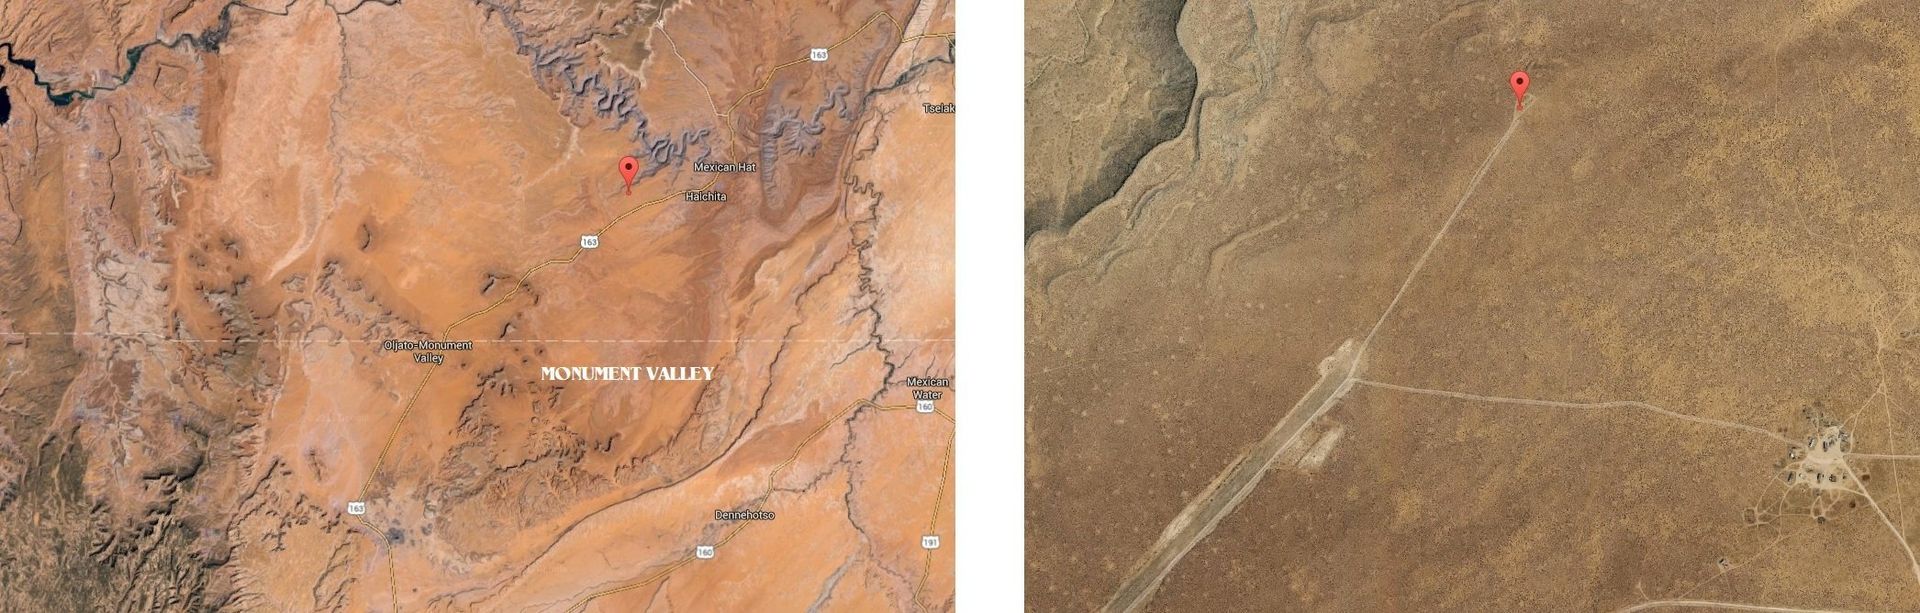 The position of the location, along highway 163 between Monument Valley and Mexican Hat